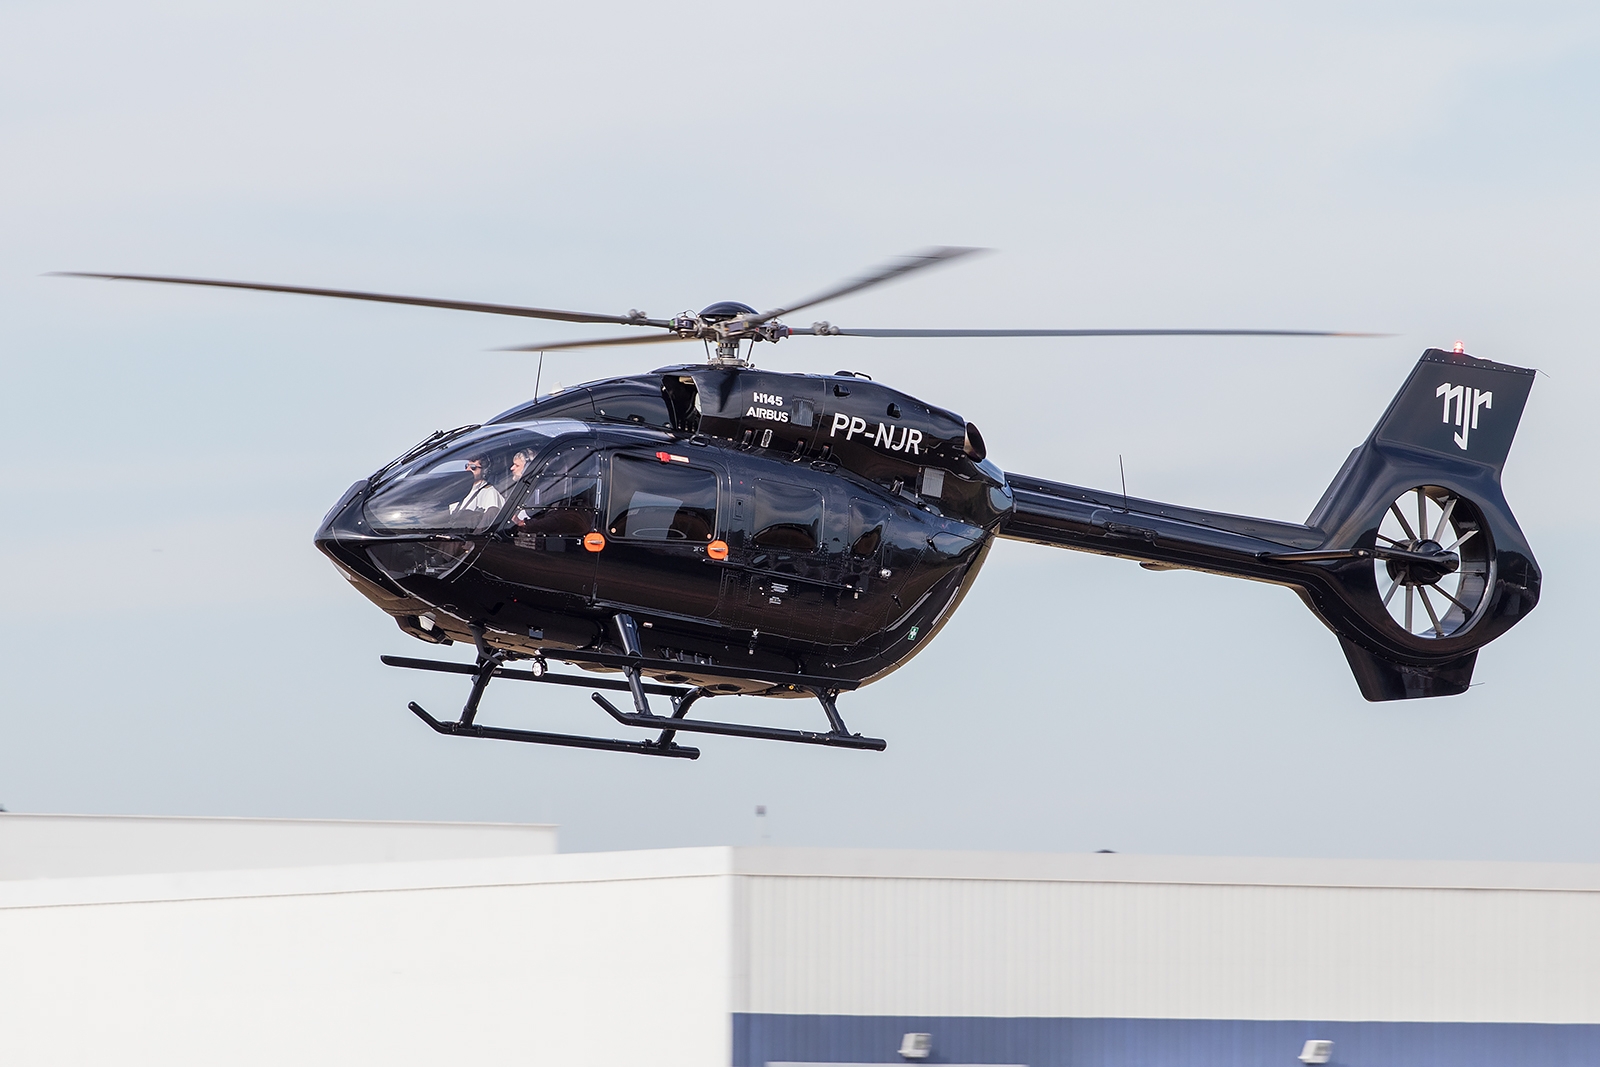 PP-NJR - Airbus Helicopters H145